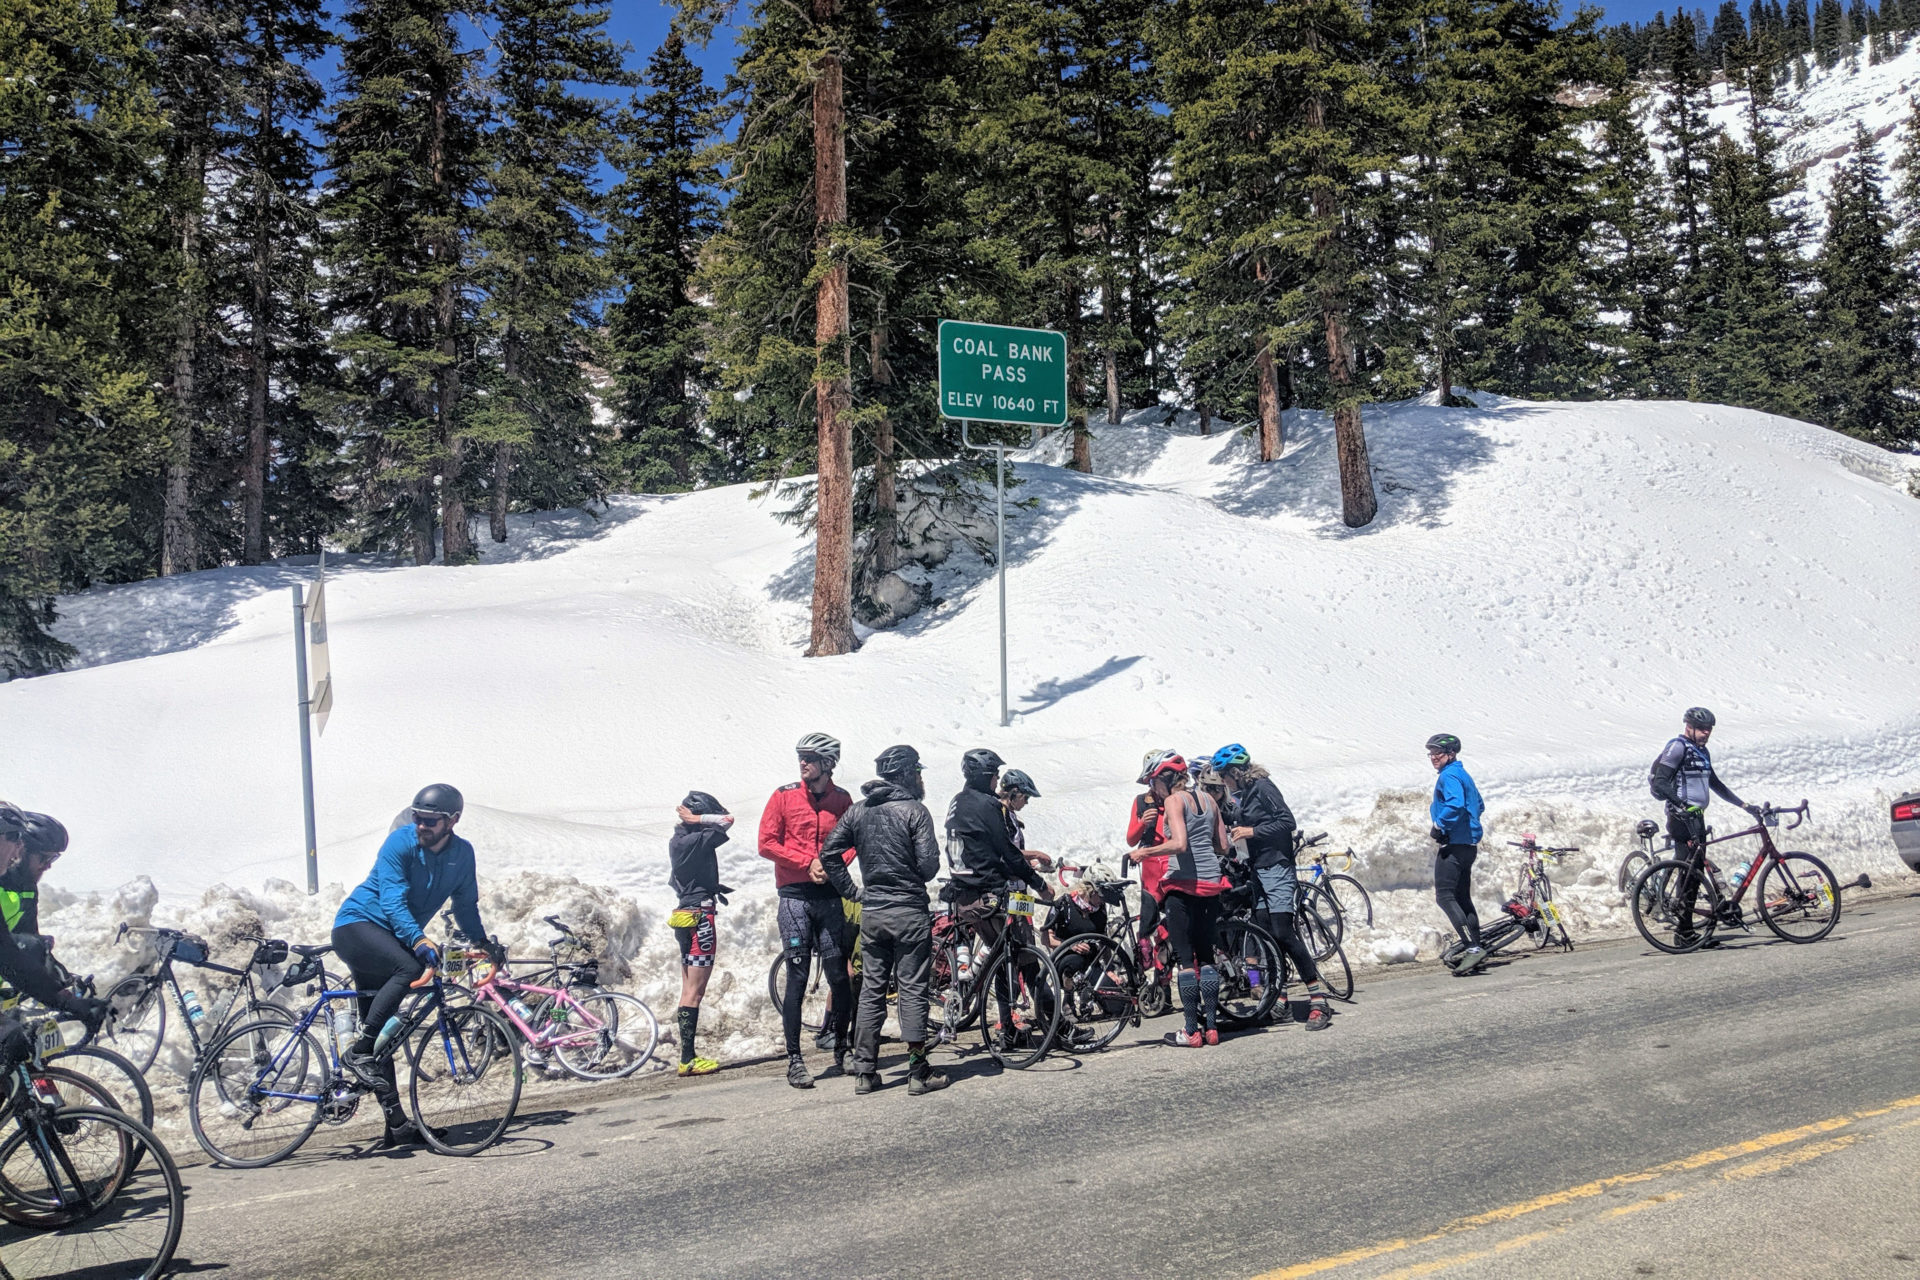 A group of people standing with their bikes on the edge of a mountain road. There is a road sign that reads "Coal Bank Pass, Elev. 10640 Ft."